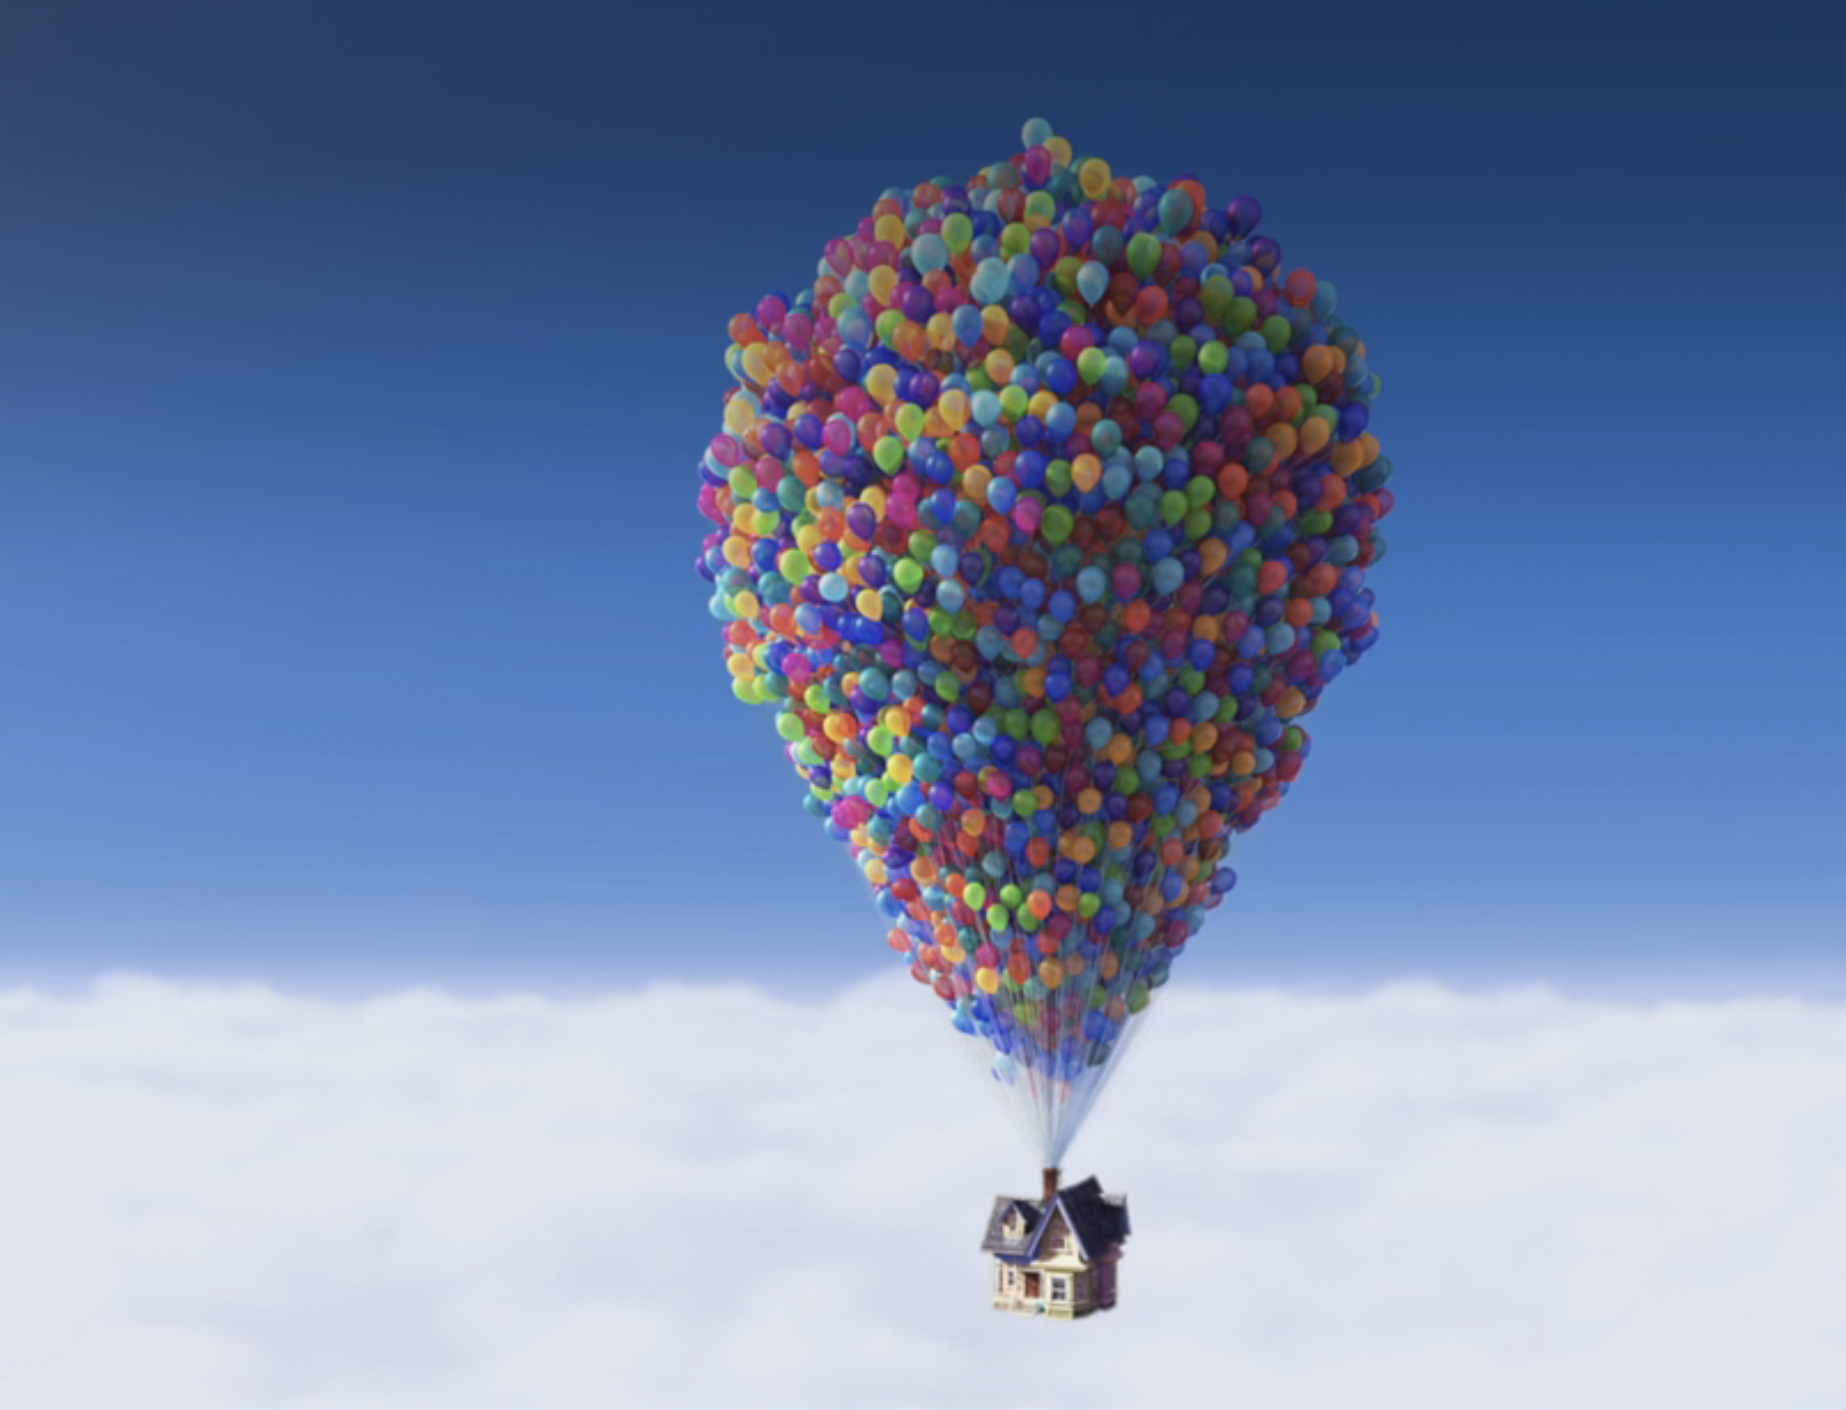 Screenshot from &quot;Up&quot;